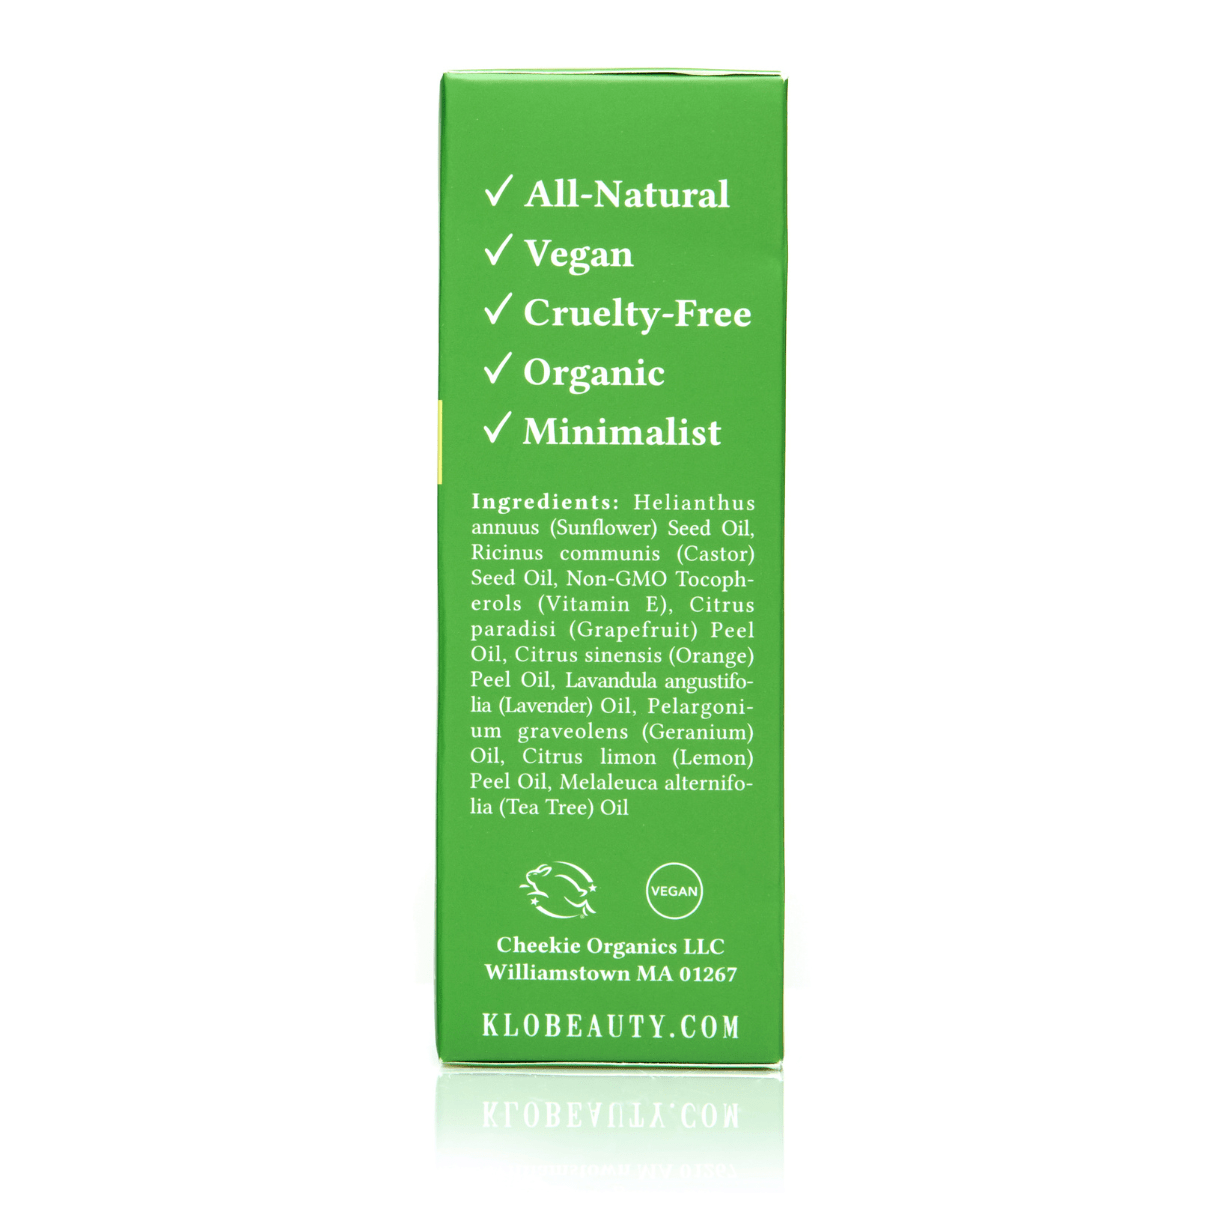 Klo Organic Beauty RE3 oil cleanser for acne-prone skin ingredients on box.